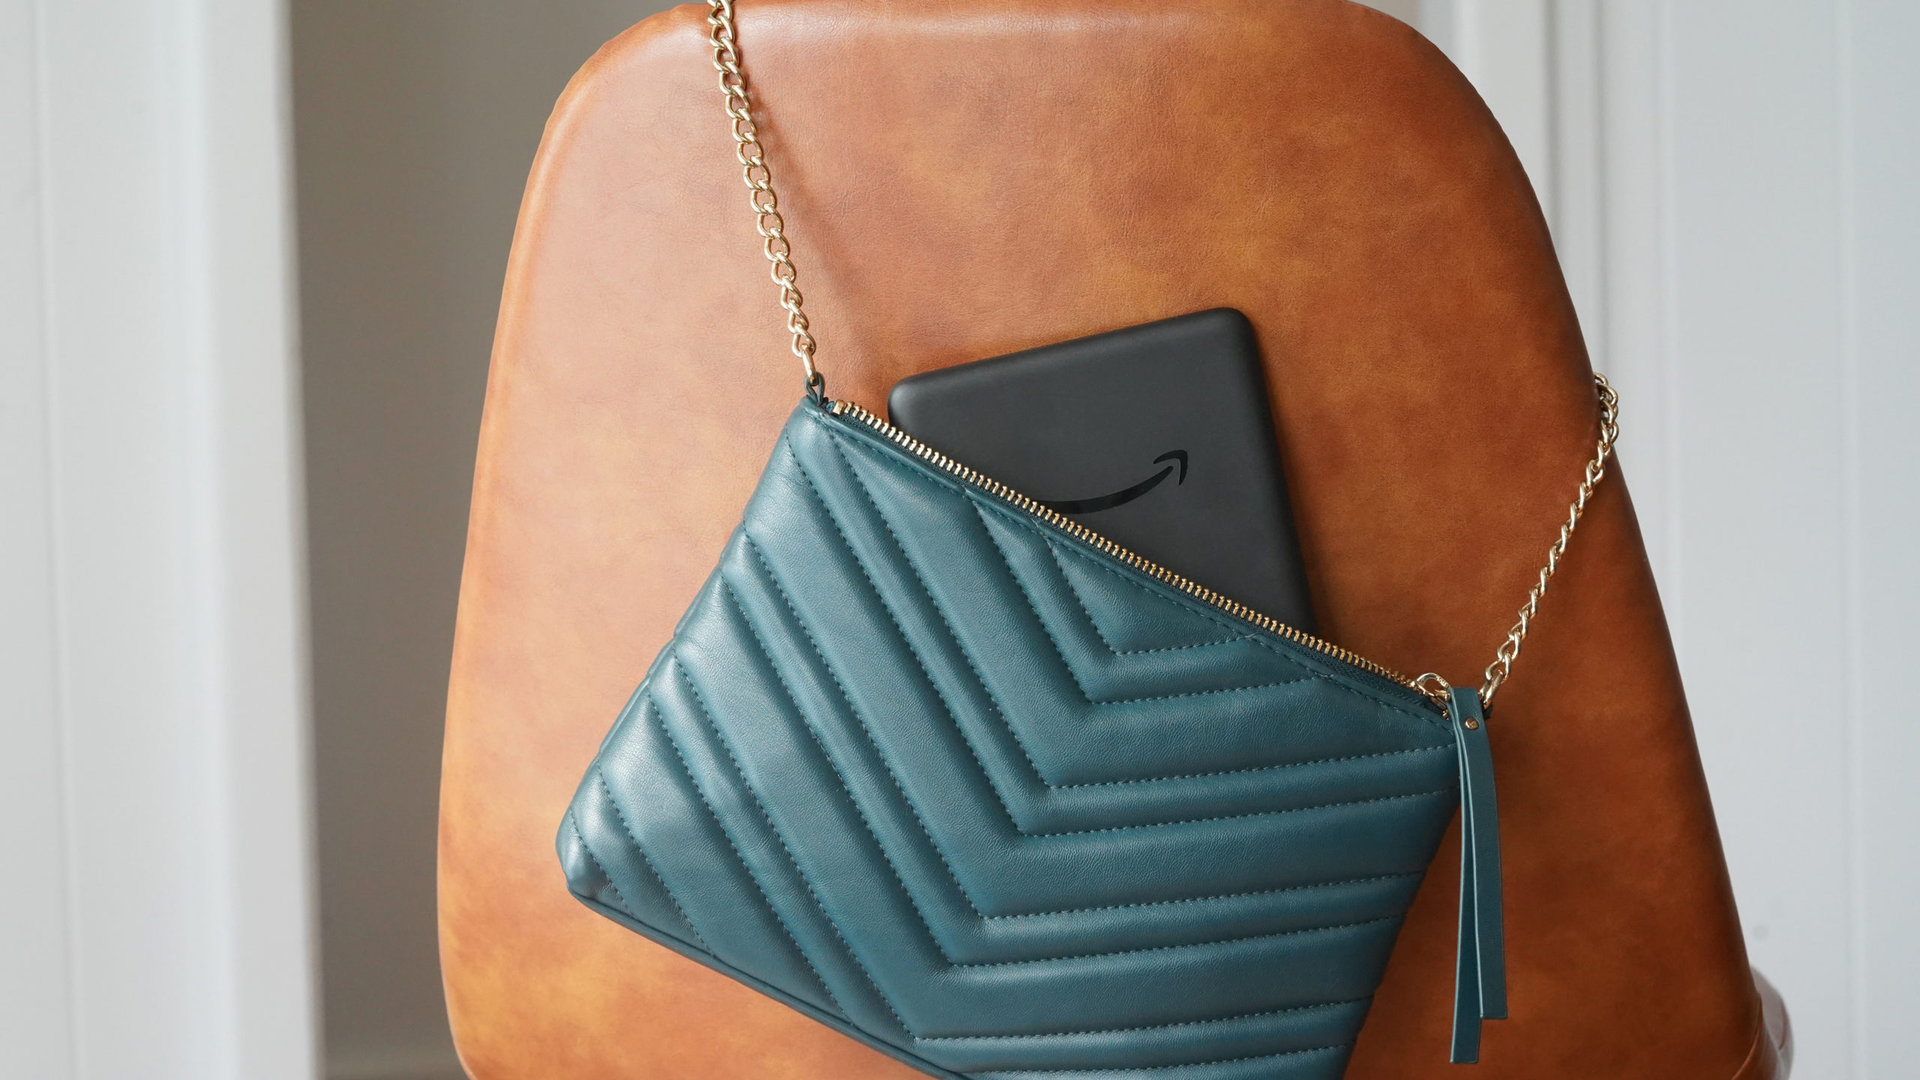 An Amazon Kindle sticks out of a woman's purse.